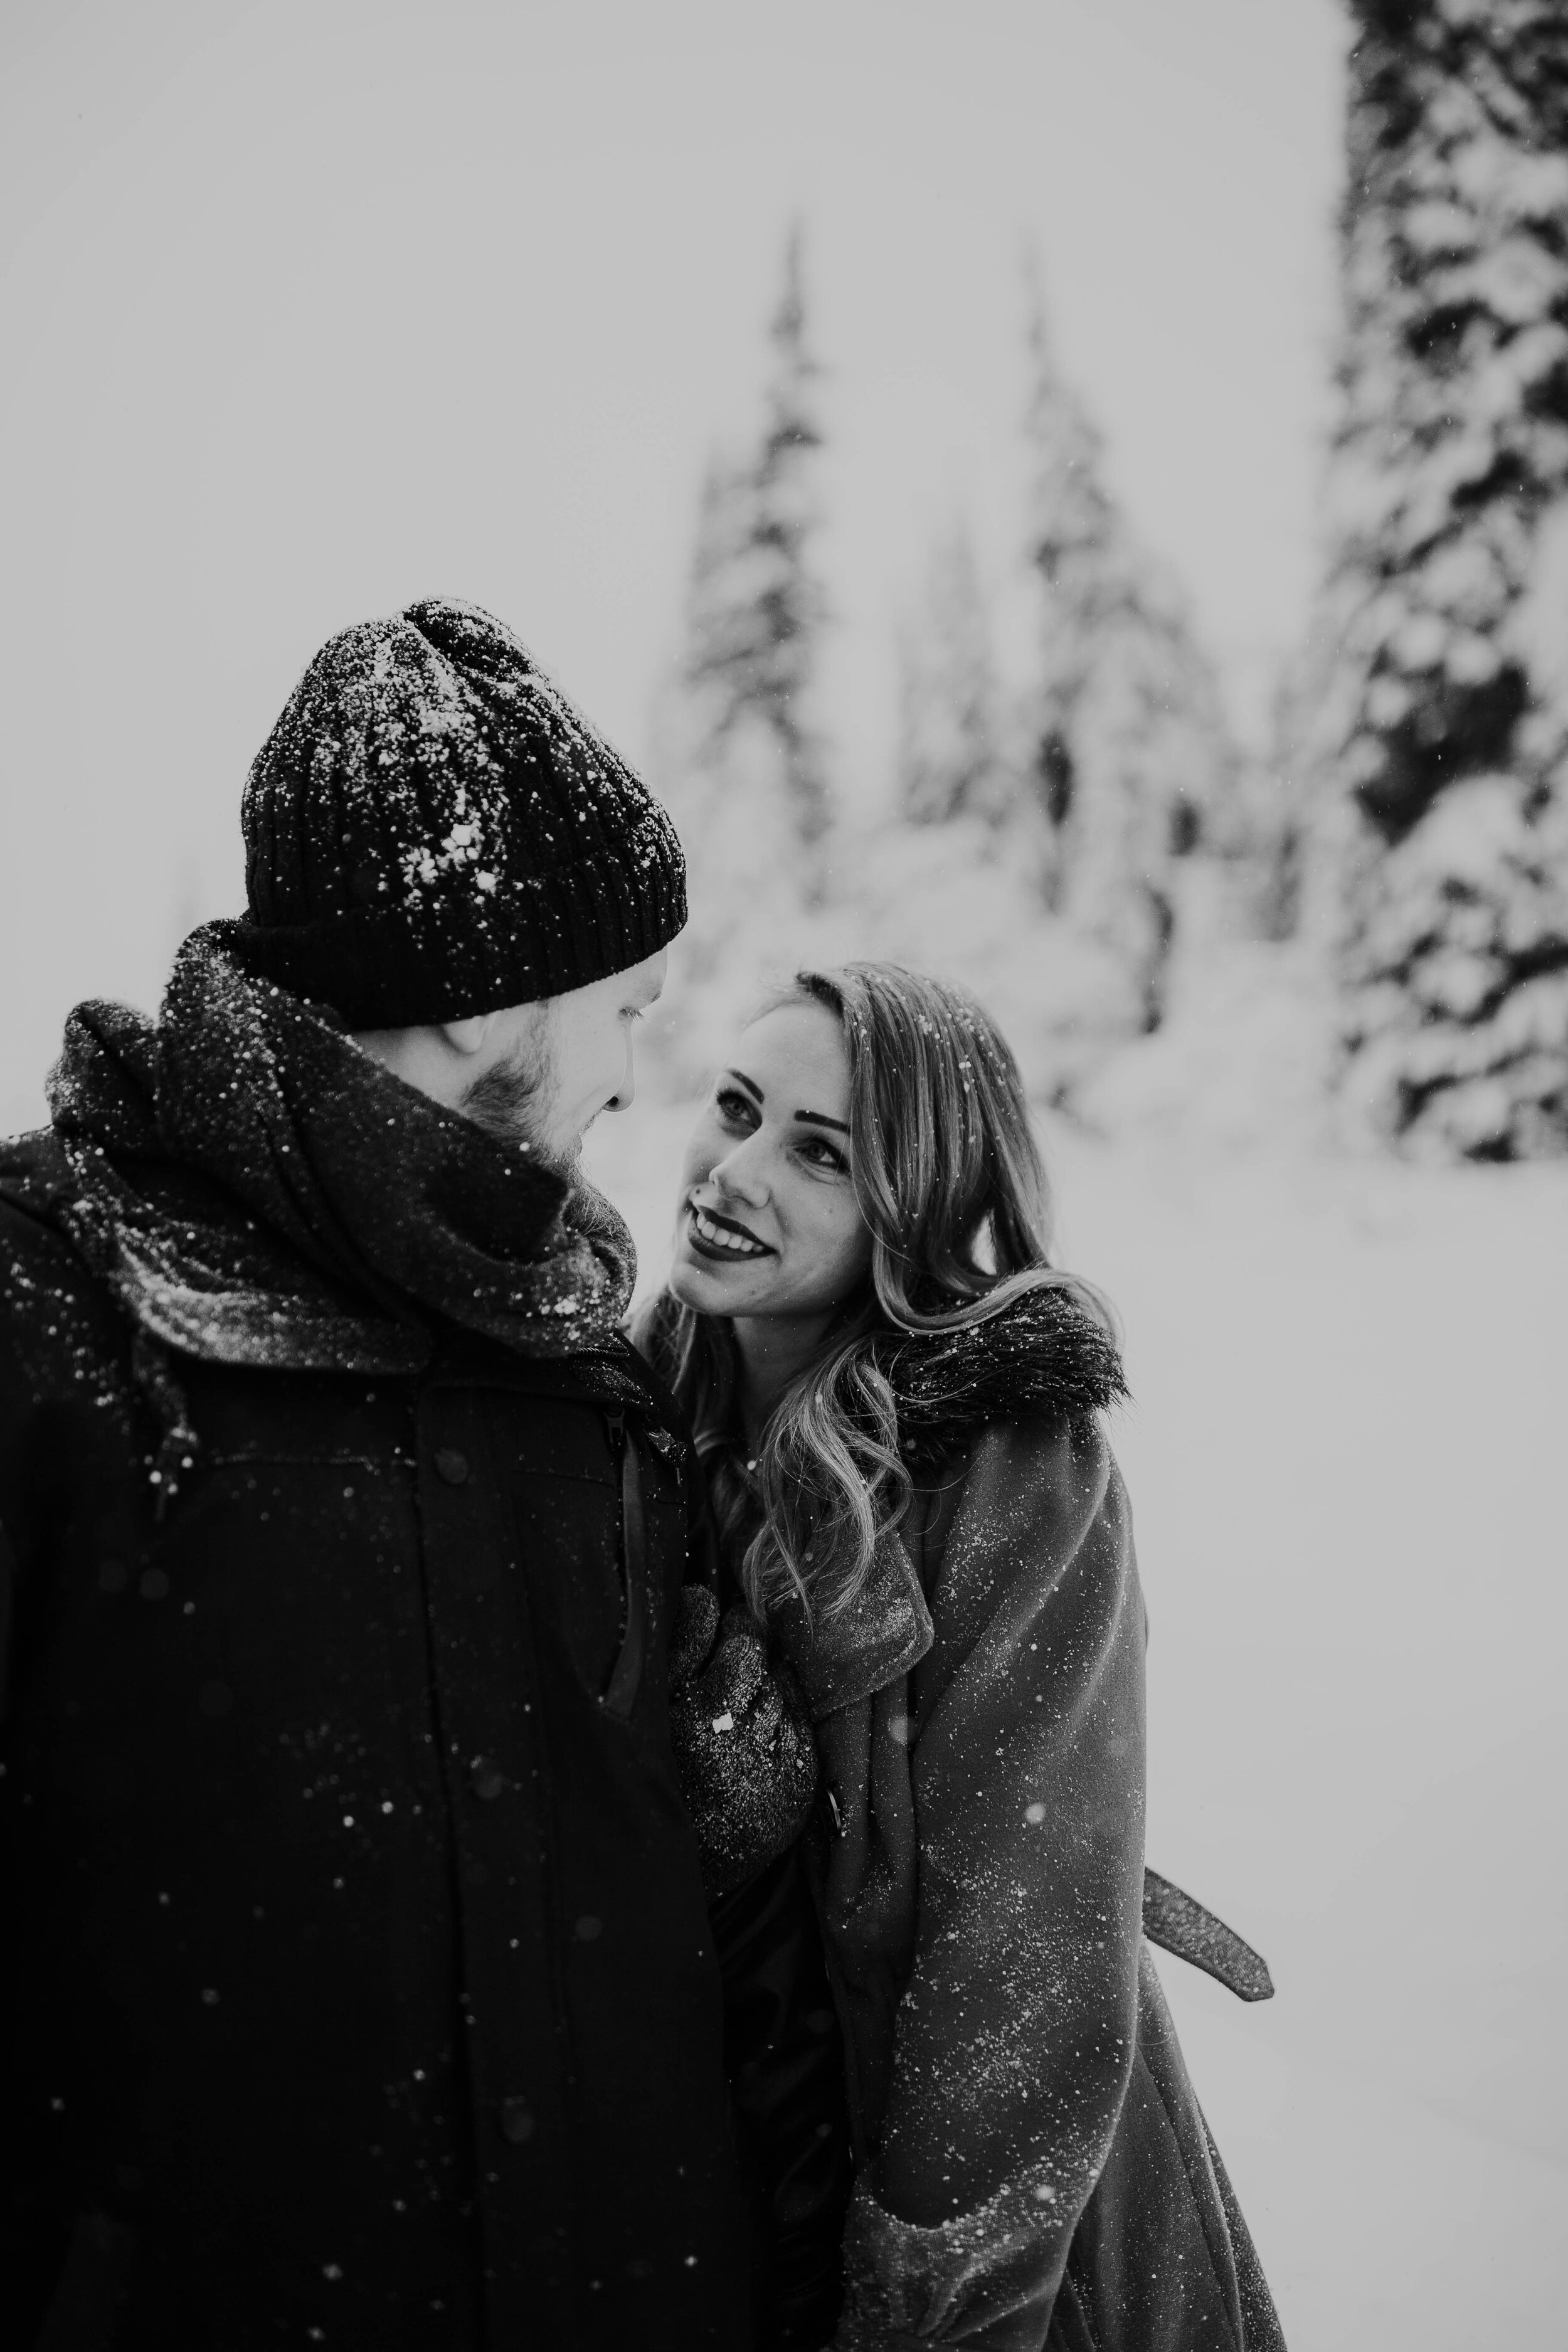 Winter couples session engagements snow mountains cozy wrapped in blanket #coupleshoot #utahphotographer #weddingphotographer #engagementsession #engagementshoot black and white